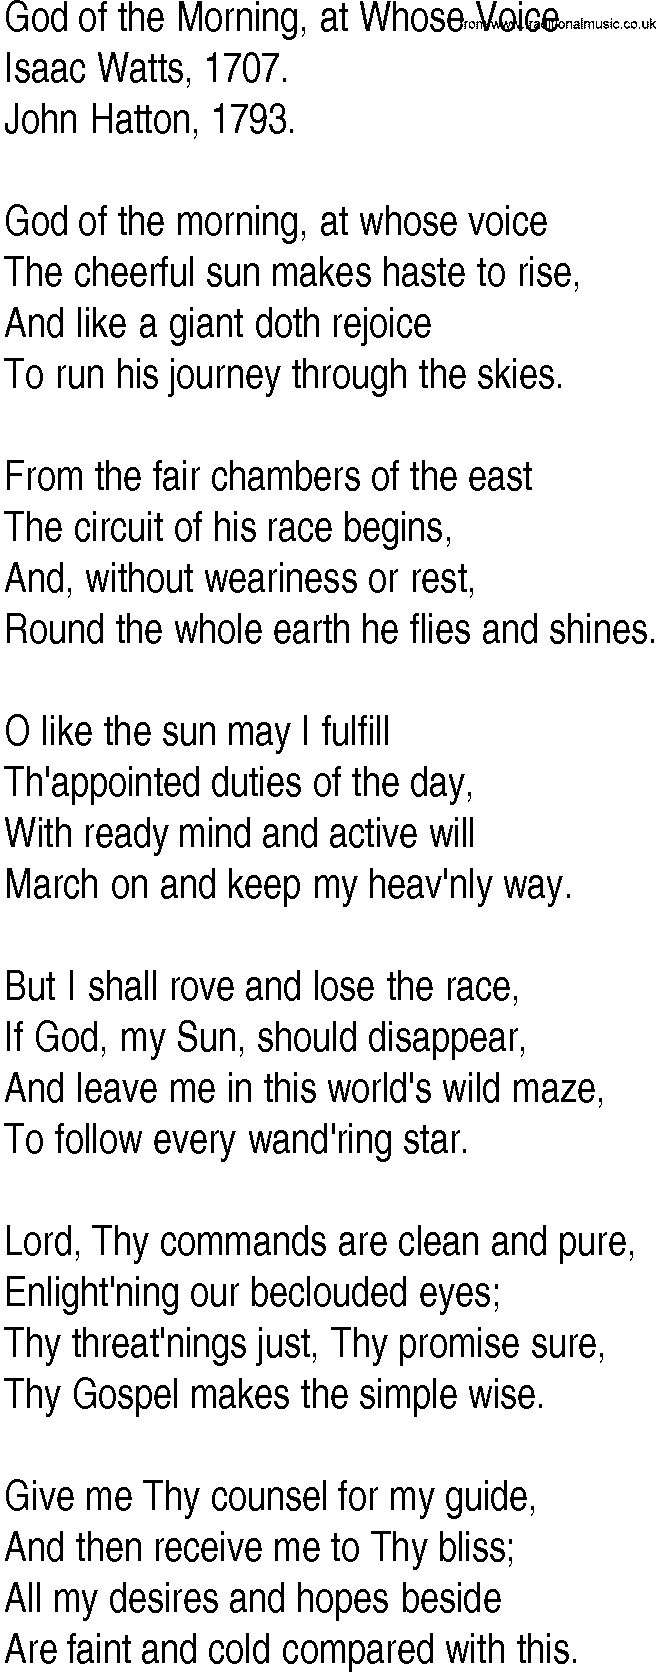 Hymn and Gospel Song: God of the Morning, at Whose Voice by Isaac Watts lyrics